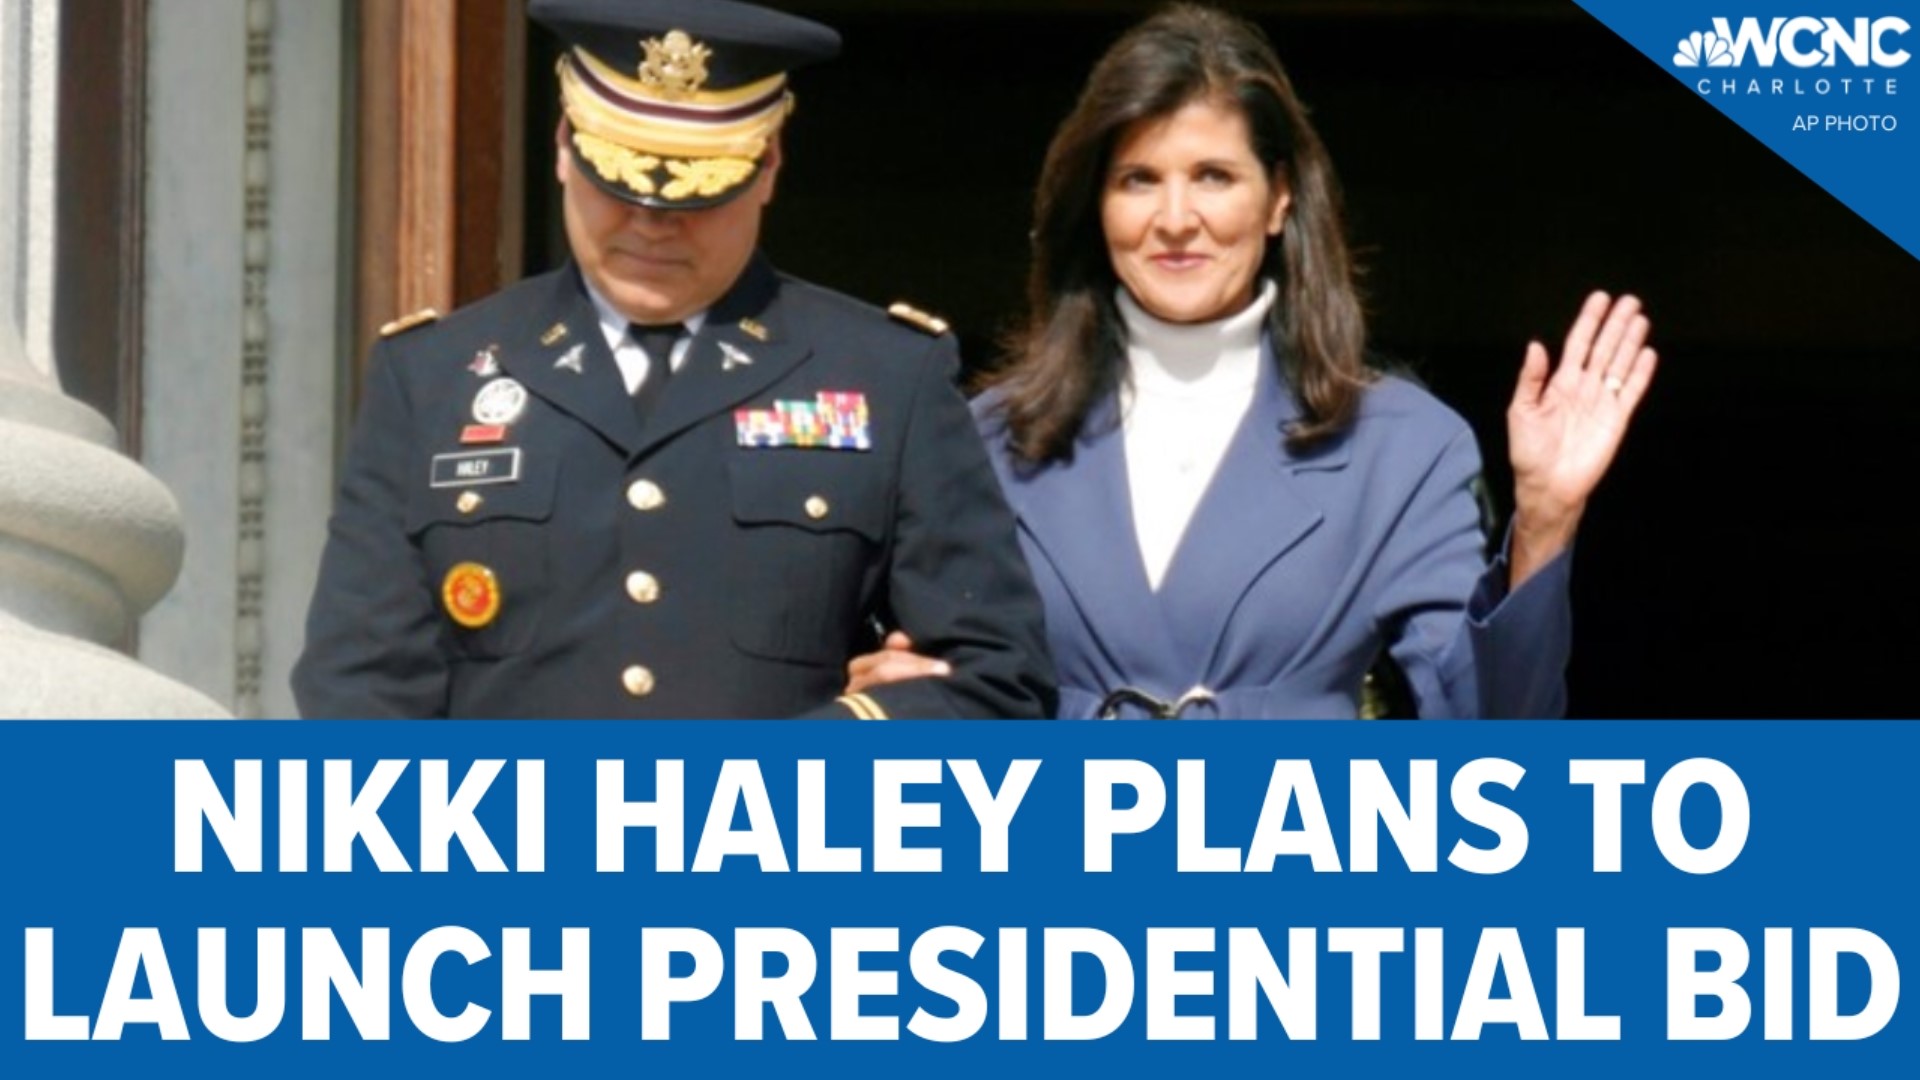 Haley served as South Carolina's governor for six years before serving as President Donald Trump's ambassador to the United Nations.